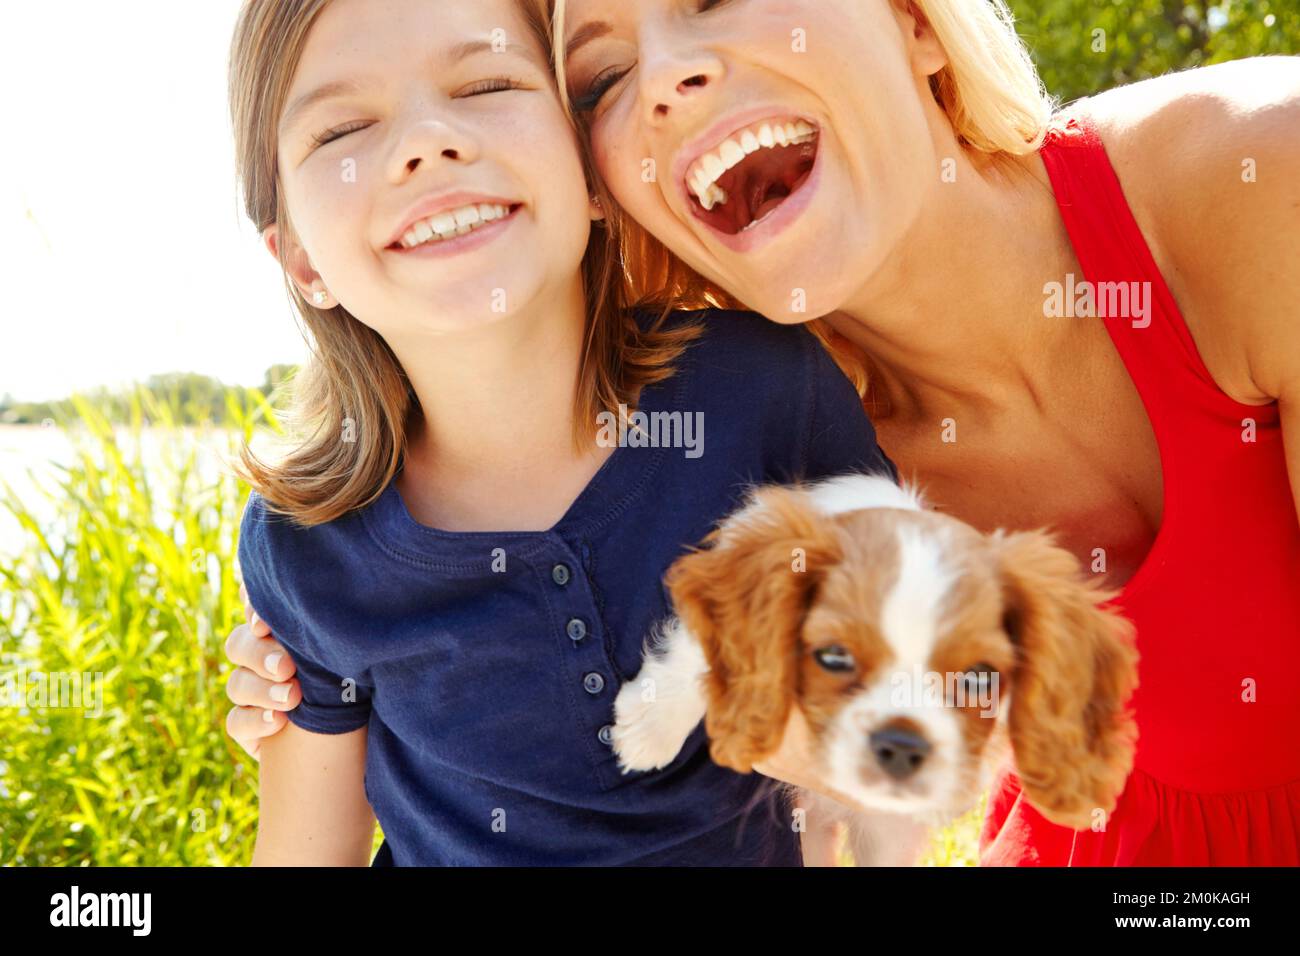 Quality time with mom and the puppy. A happy mother and daughter holding a cute puppy while they stand outside. Stock Photo